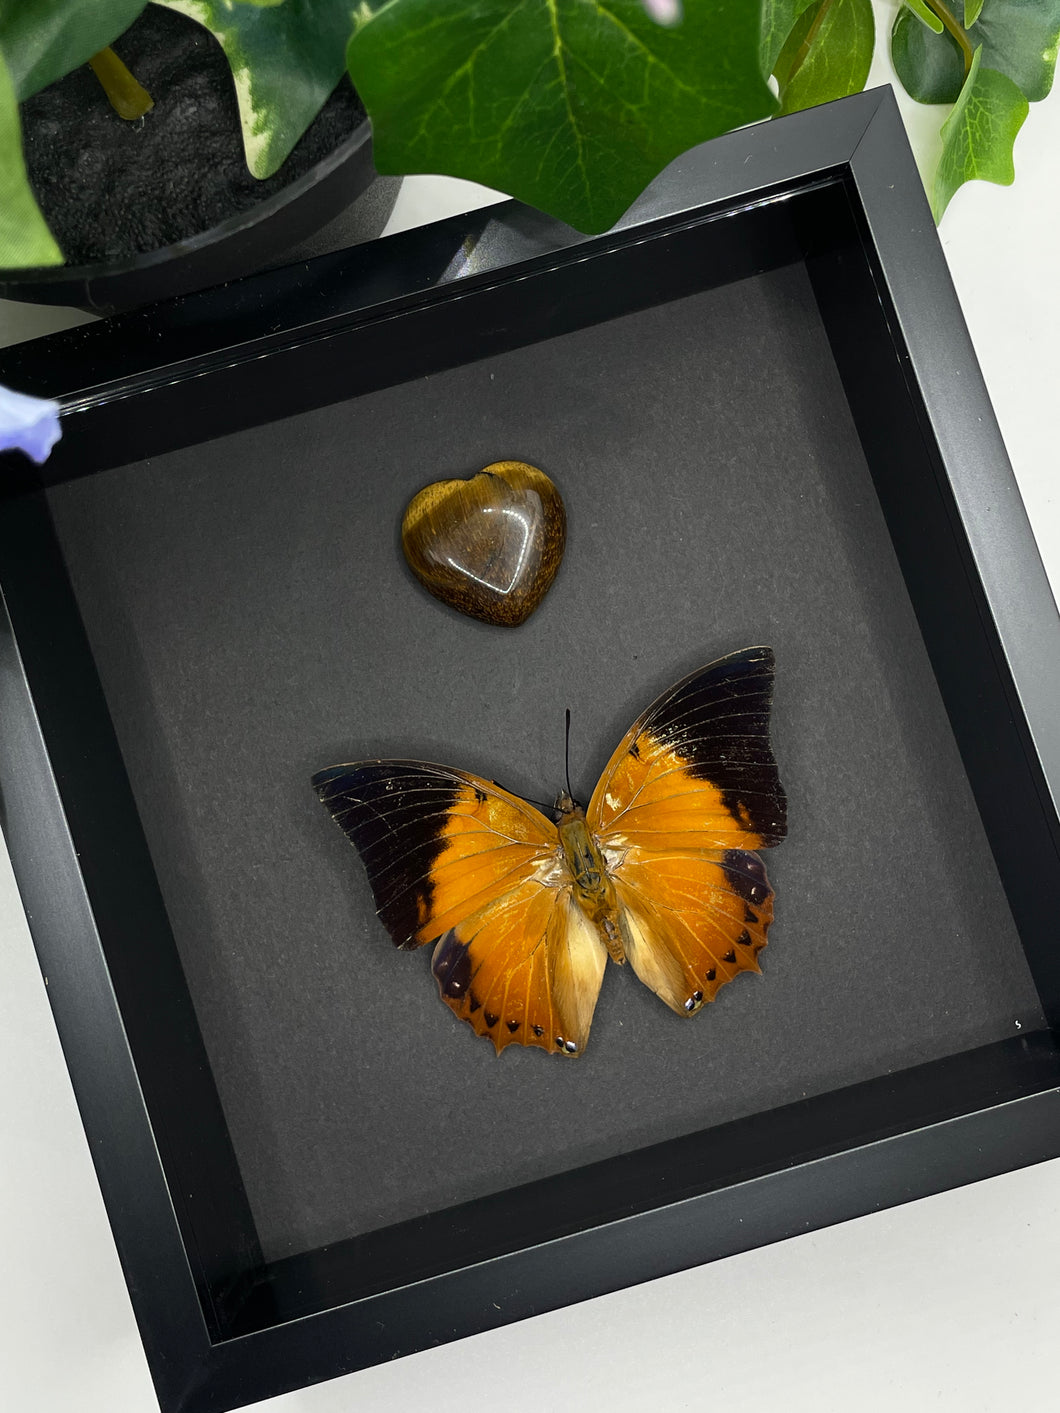 Charaxes Bernadus Butterfly in a frame + Tigers Eye